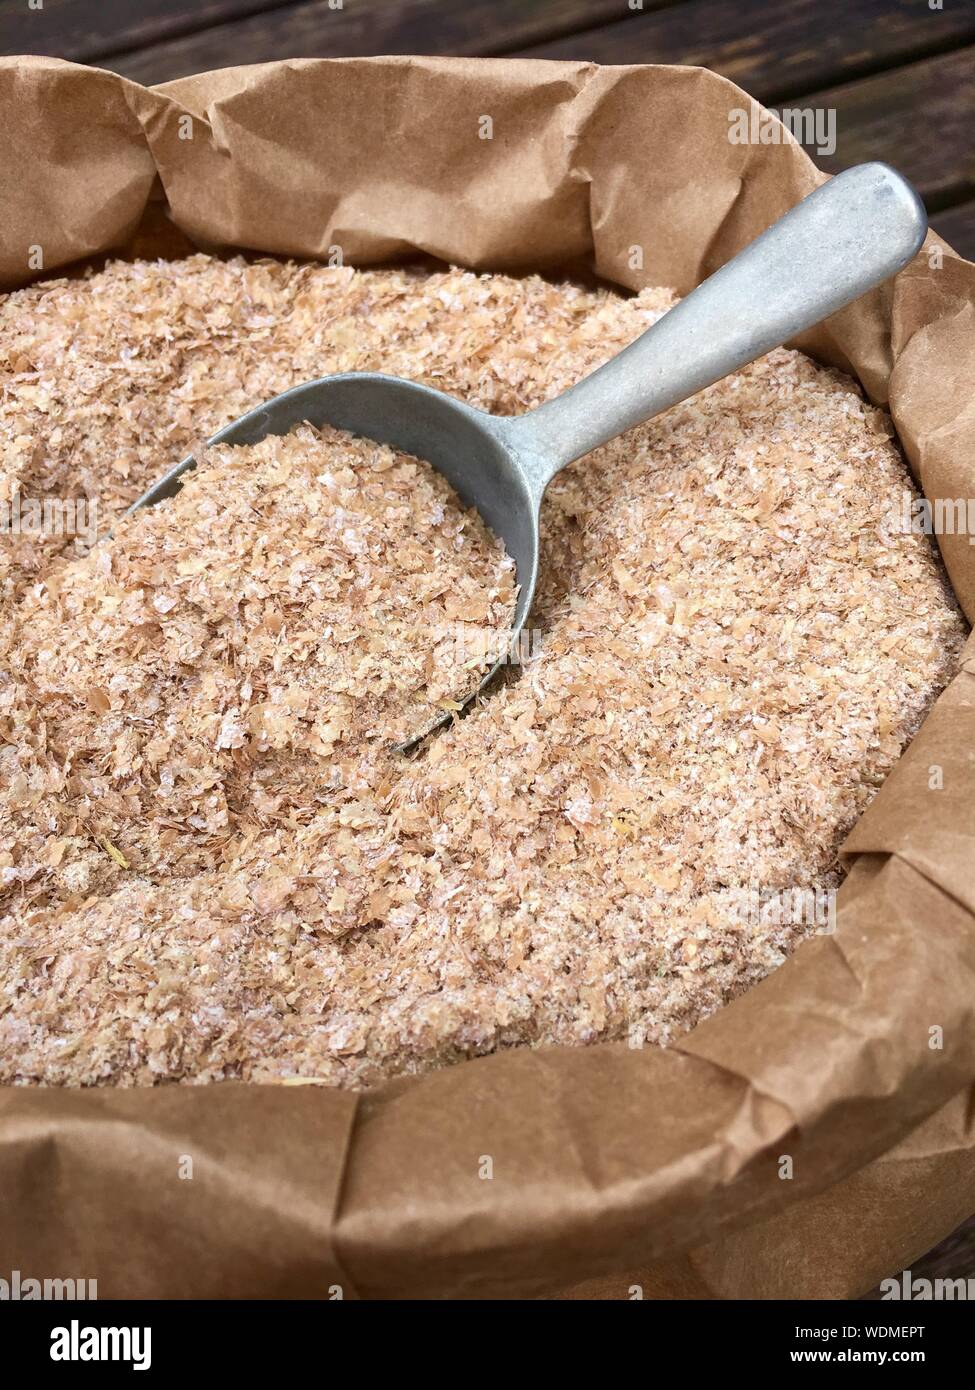 High Angle View Of Wheat Bran In Paper Bag Stock Photo